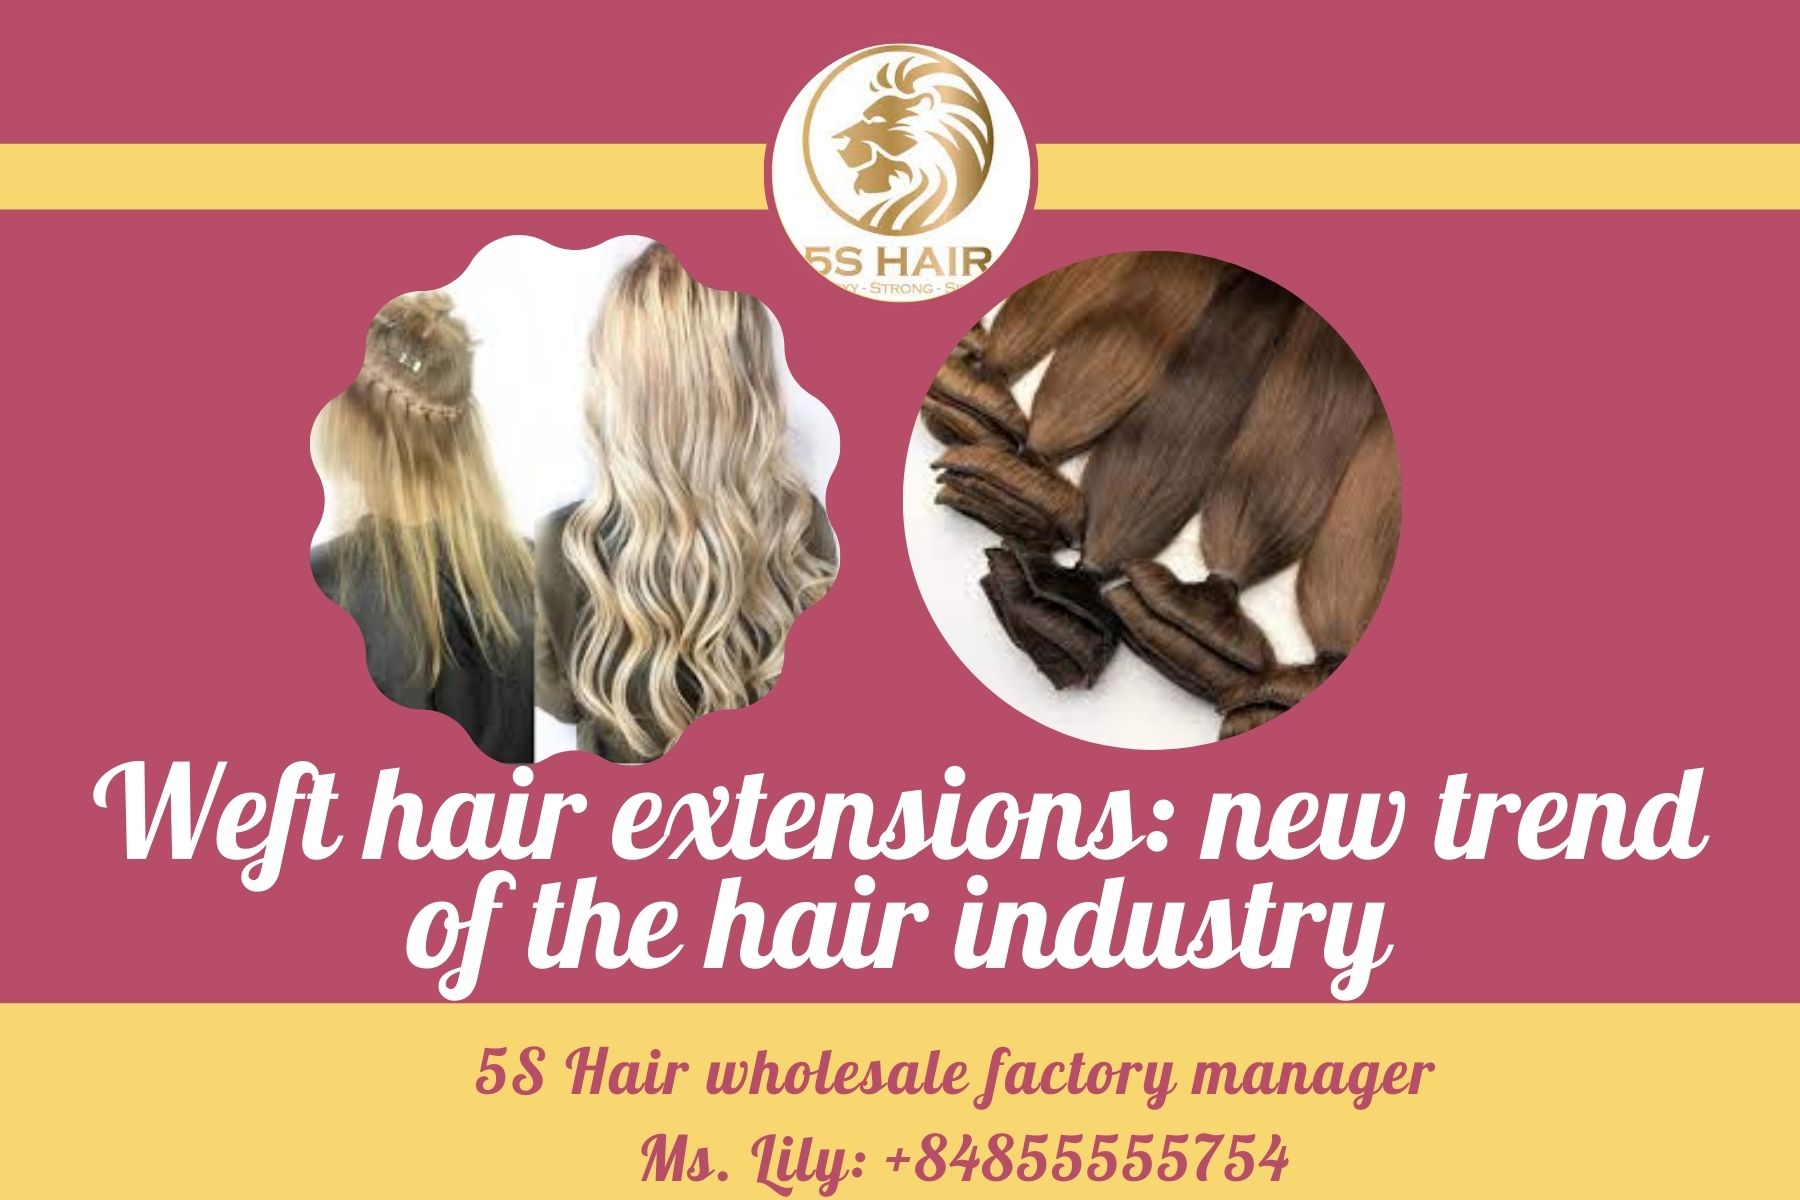 weft-hair-extensions-new-trend-of-the-hair-industry